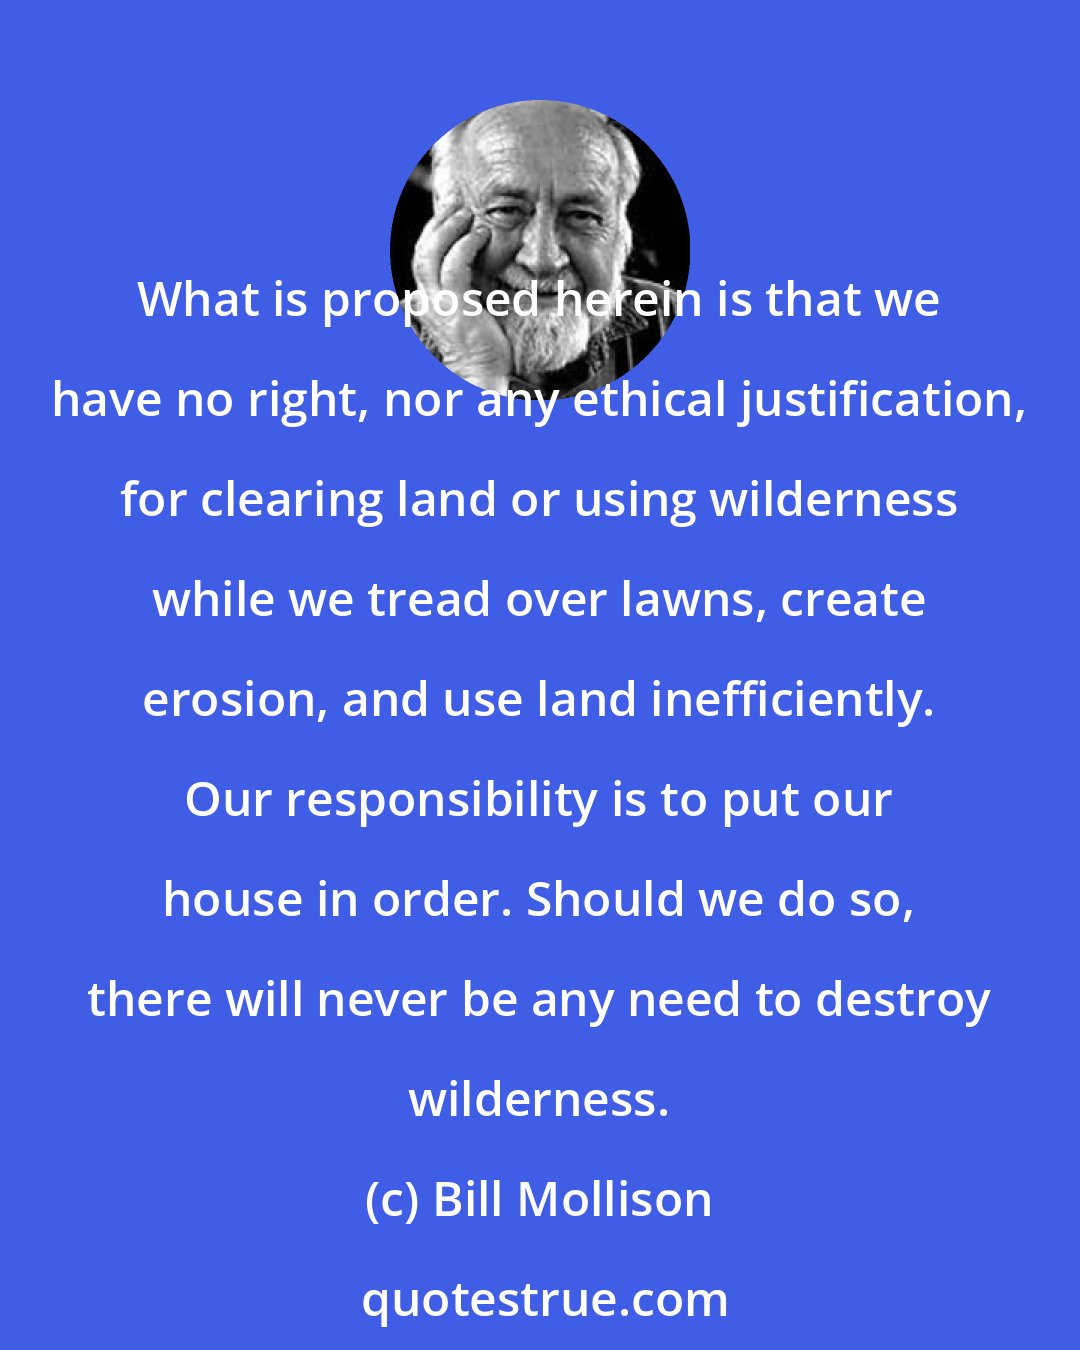 Bill Mollison: What is proposed herein is that we have no right, nor any ethical justification, for clearing land or using wilderness while we tread over lawns, create erosion, and use land inefficiently. Our responsibility is to put our house in order. Should we do so, there will never be any need to destroy wilderness.